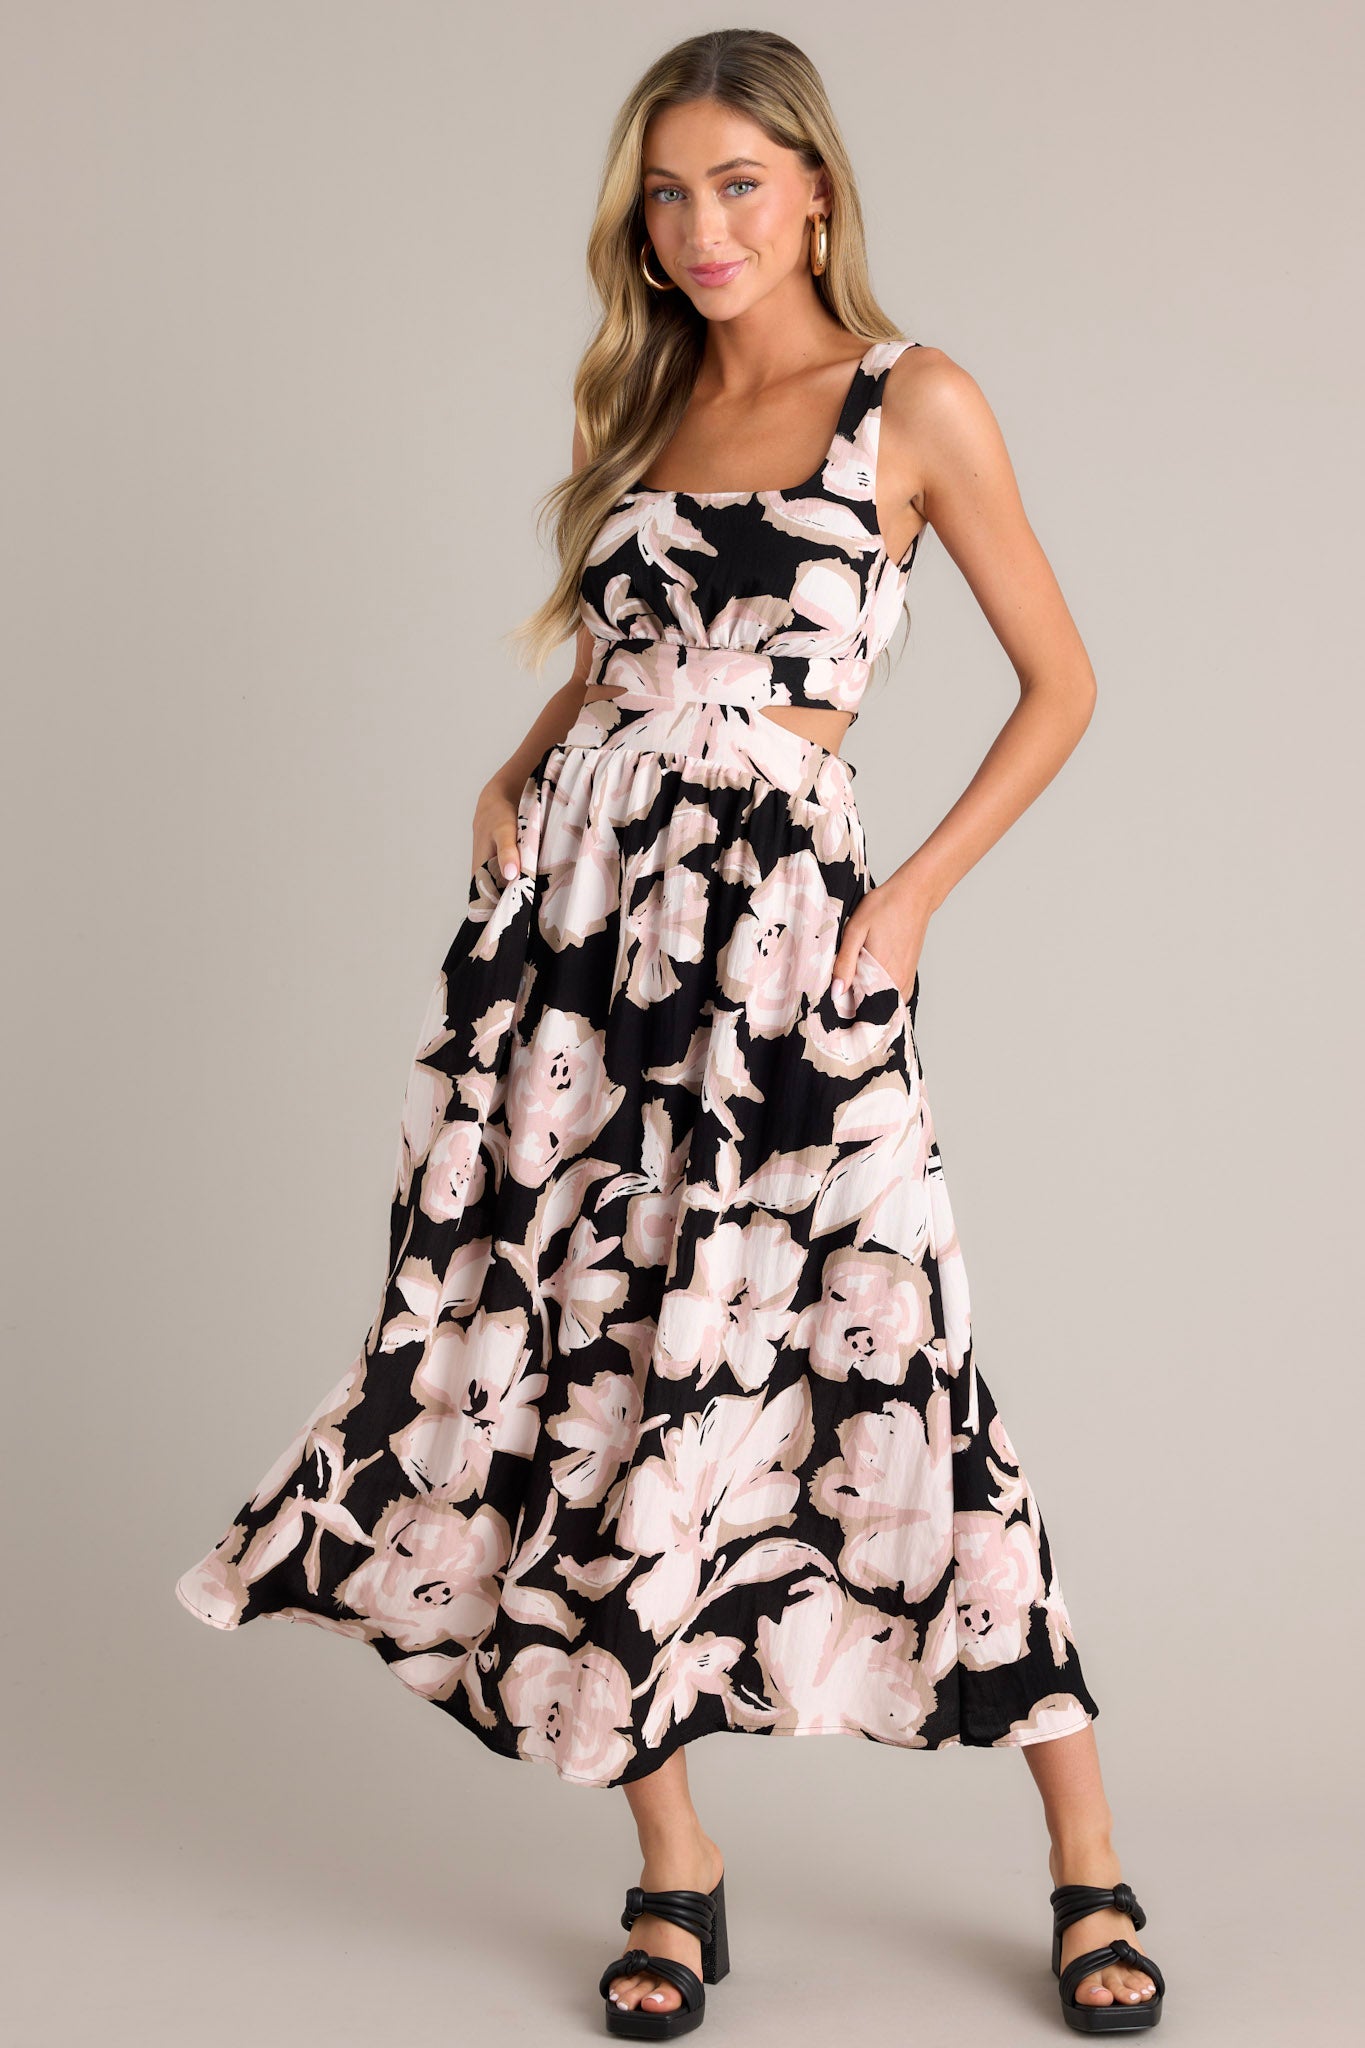 This black maxi dress features a square neckline, thick straps, an elastic back insert, a self-tie back feature, waist cutouts with a smocked back insert, functional hip pockets, and an all over floral pattern.